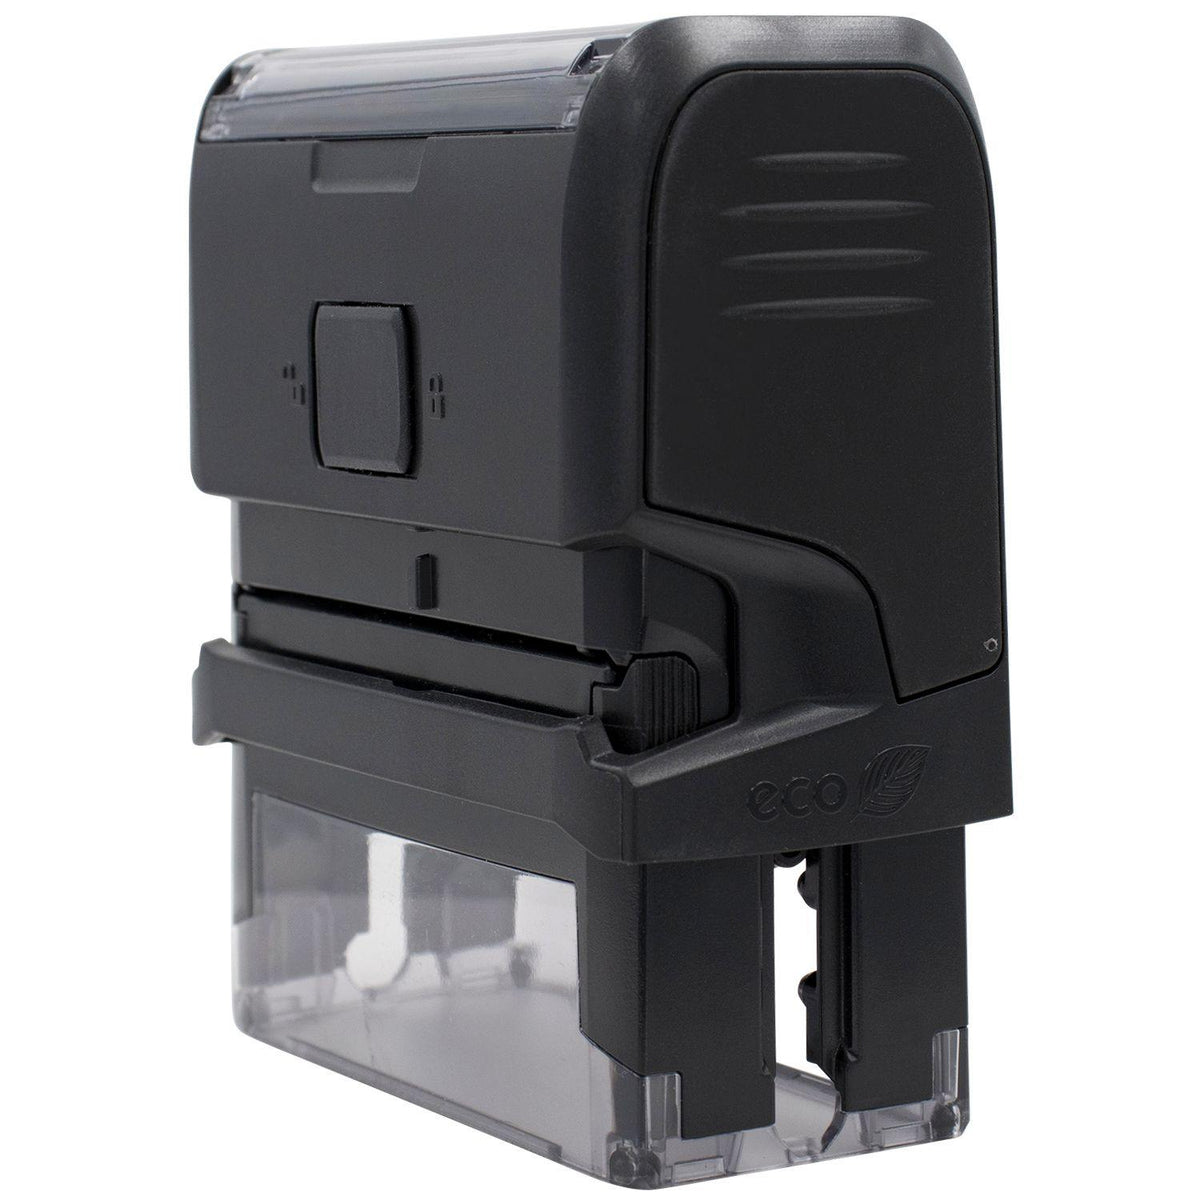 Self-Inking Allergies Stamp - Engineer Seal Stamps - Brand_Trodat, Impression Size_Small, Stamp Type_Self-Inking Stamp, Type of Use_Medical Office